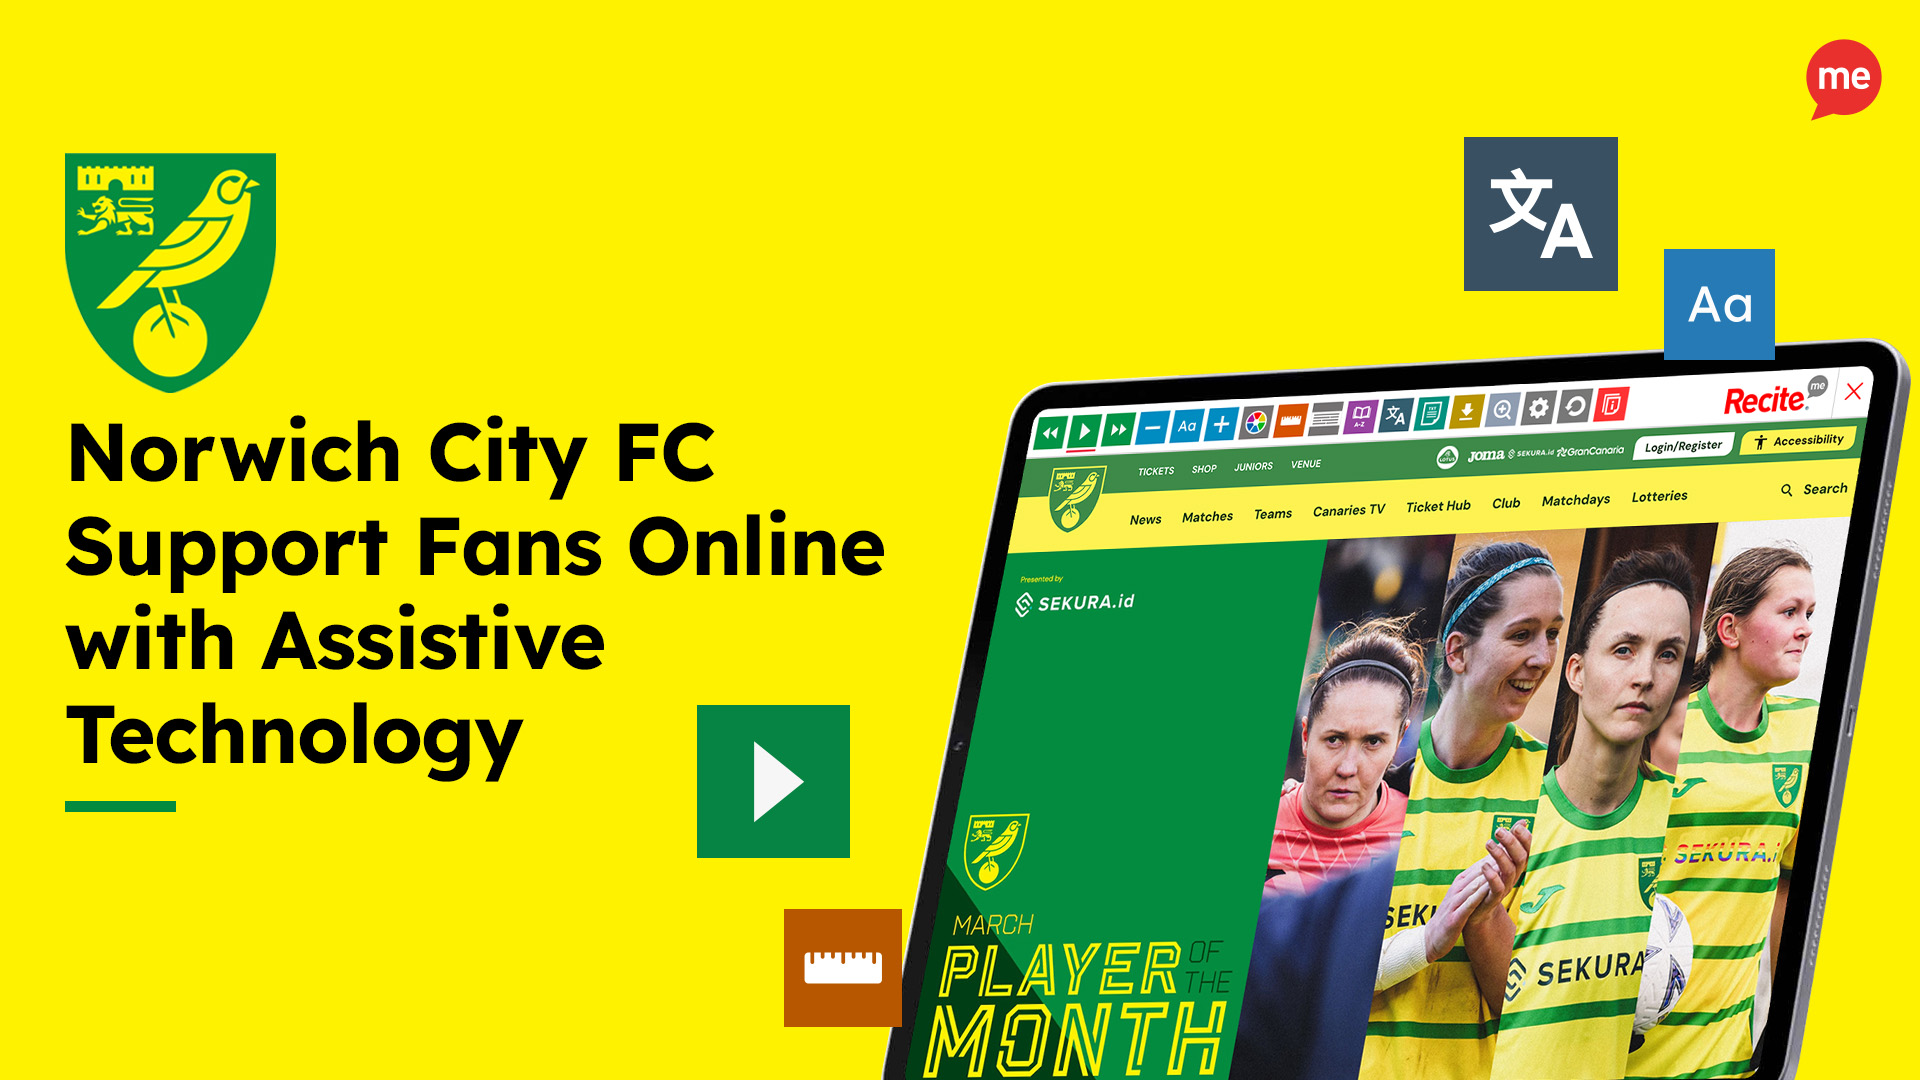 Norwich City FC Support Fans Online with Assistive Technology. Mock-up of the Recite Me toolbar being used on the Norwich City FC website